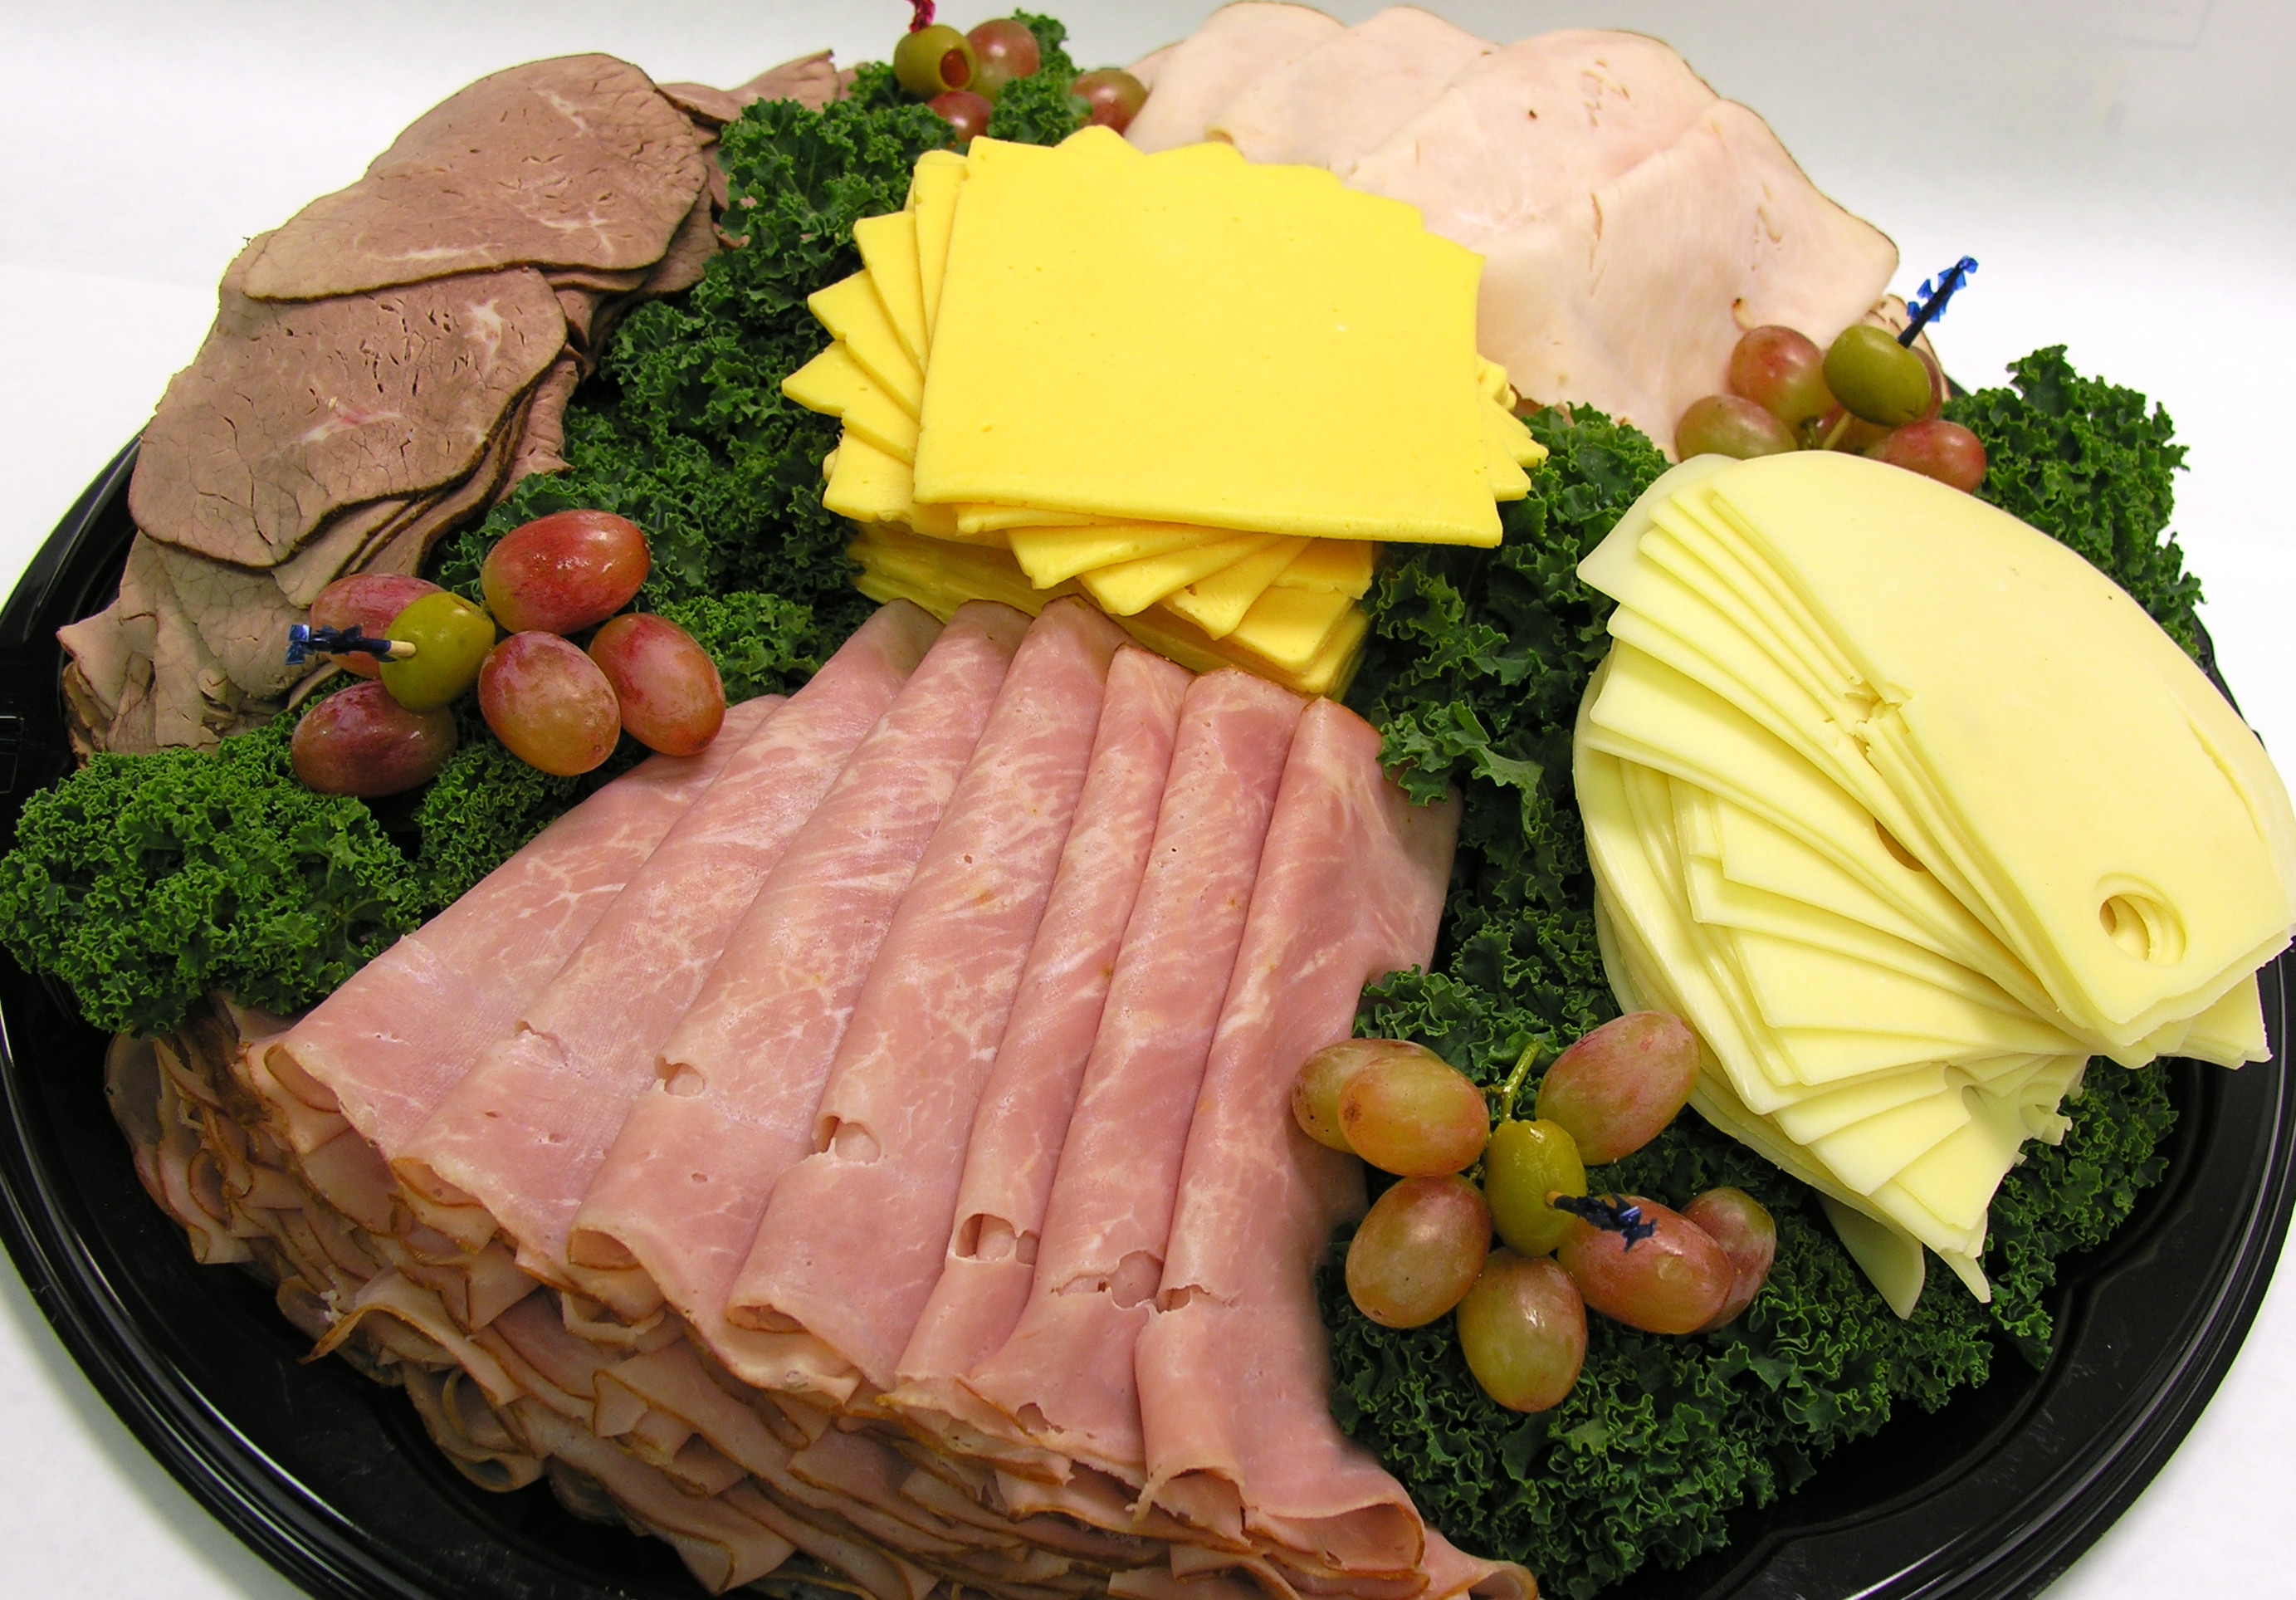 meat-cheese-trays-large-serves-25-30-people-miller-s-food-market